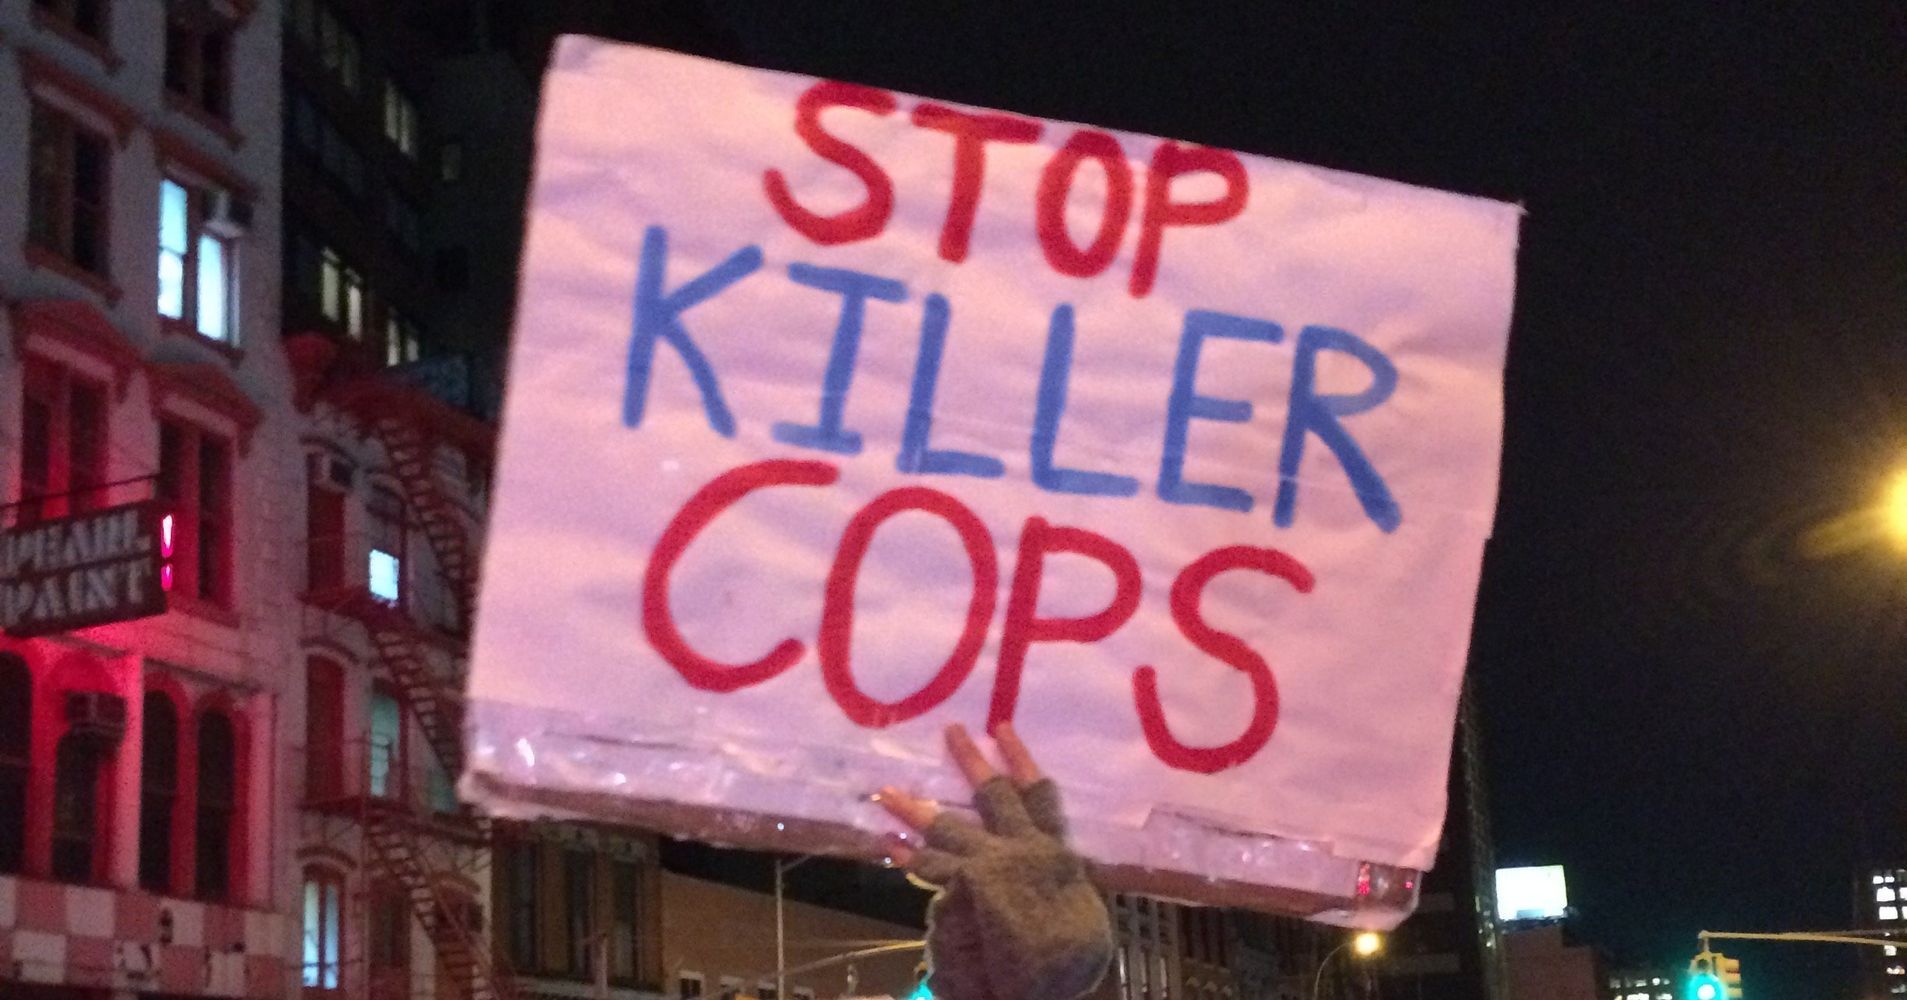 lives matter violence cops against things tell